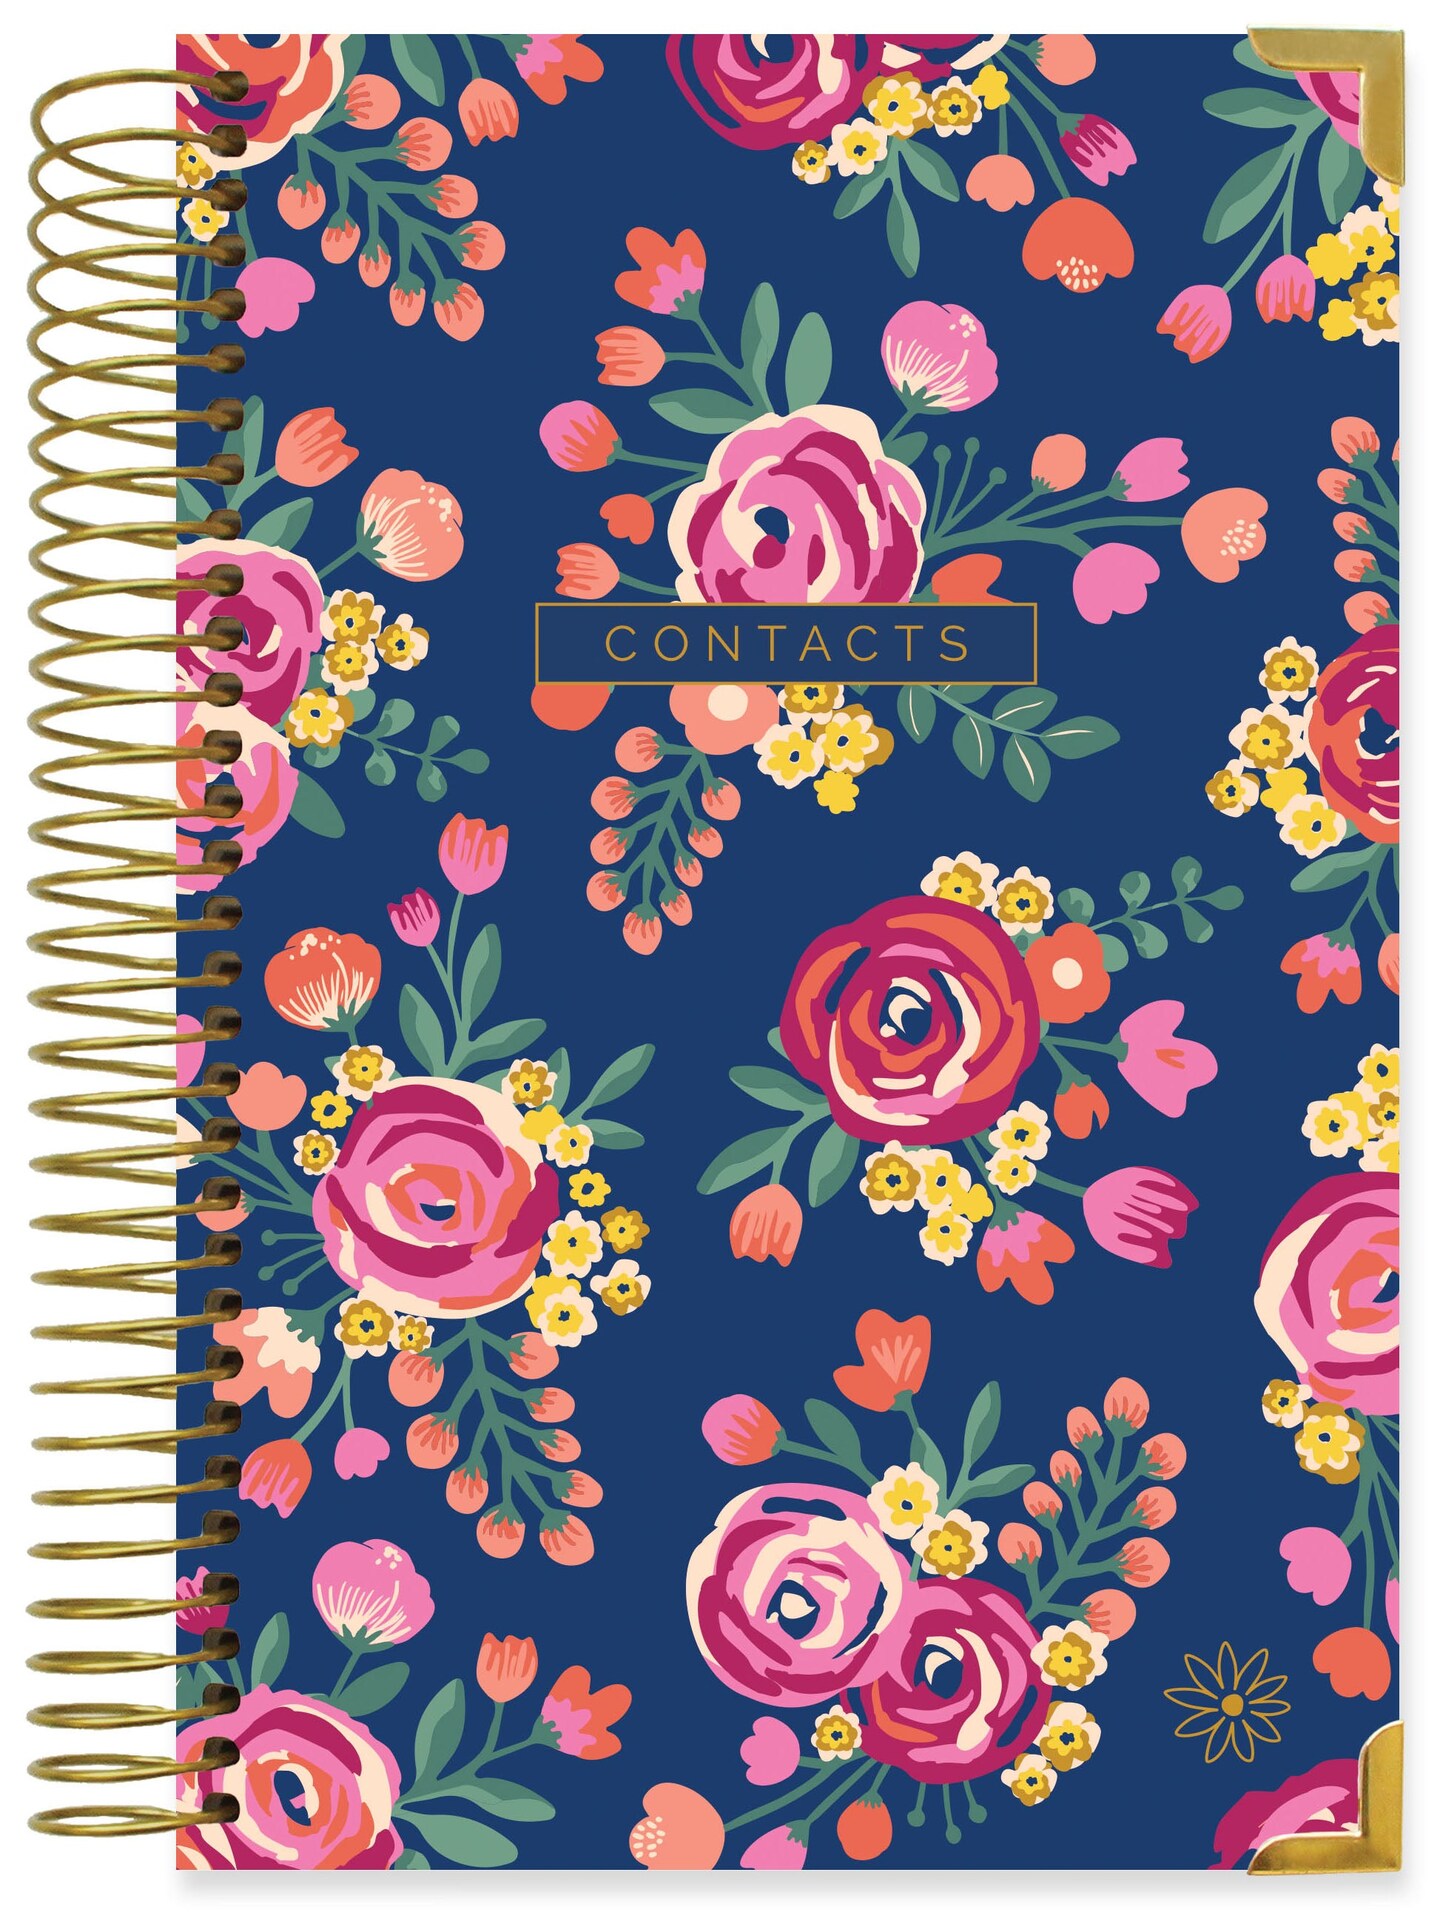 bloom daily planners Contact Book, Vintage Floral Gold Stamp